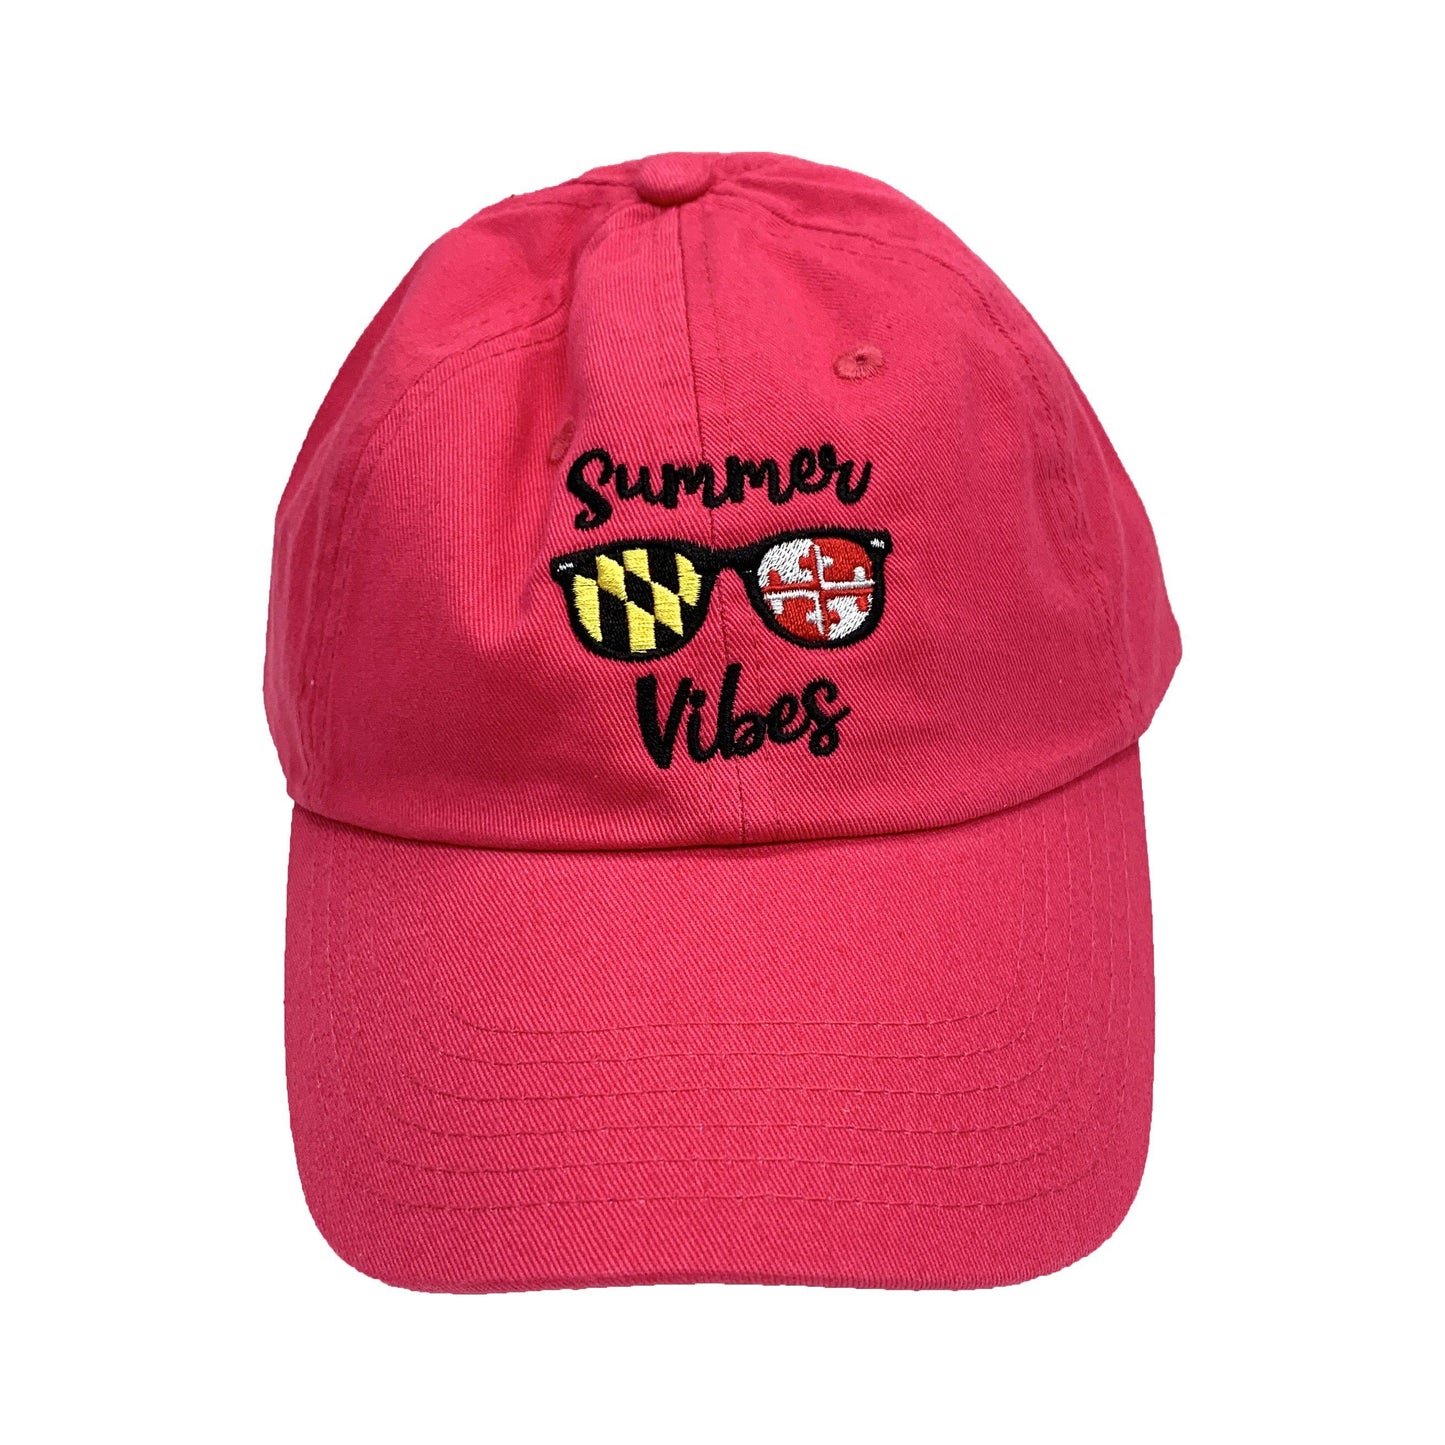 Summer Vibes (Neon Pink) / Baseball Hat - Route One Apparel